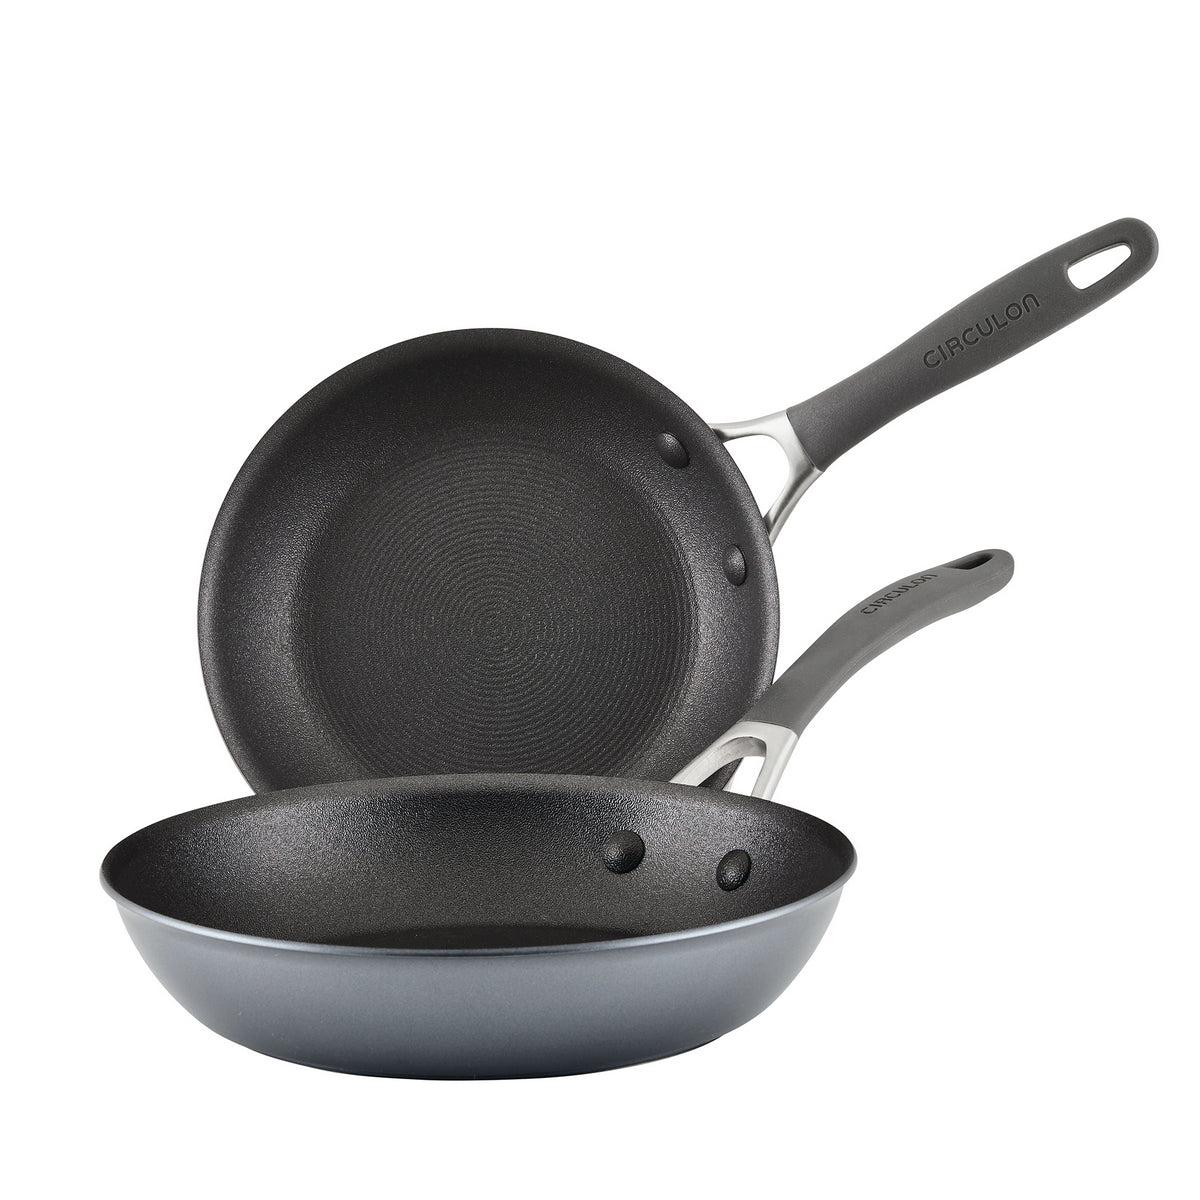 Image of ScratchDefense Extreme Non-Stick Induction Frying Pan Twin Set - Small & Medium